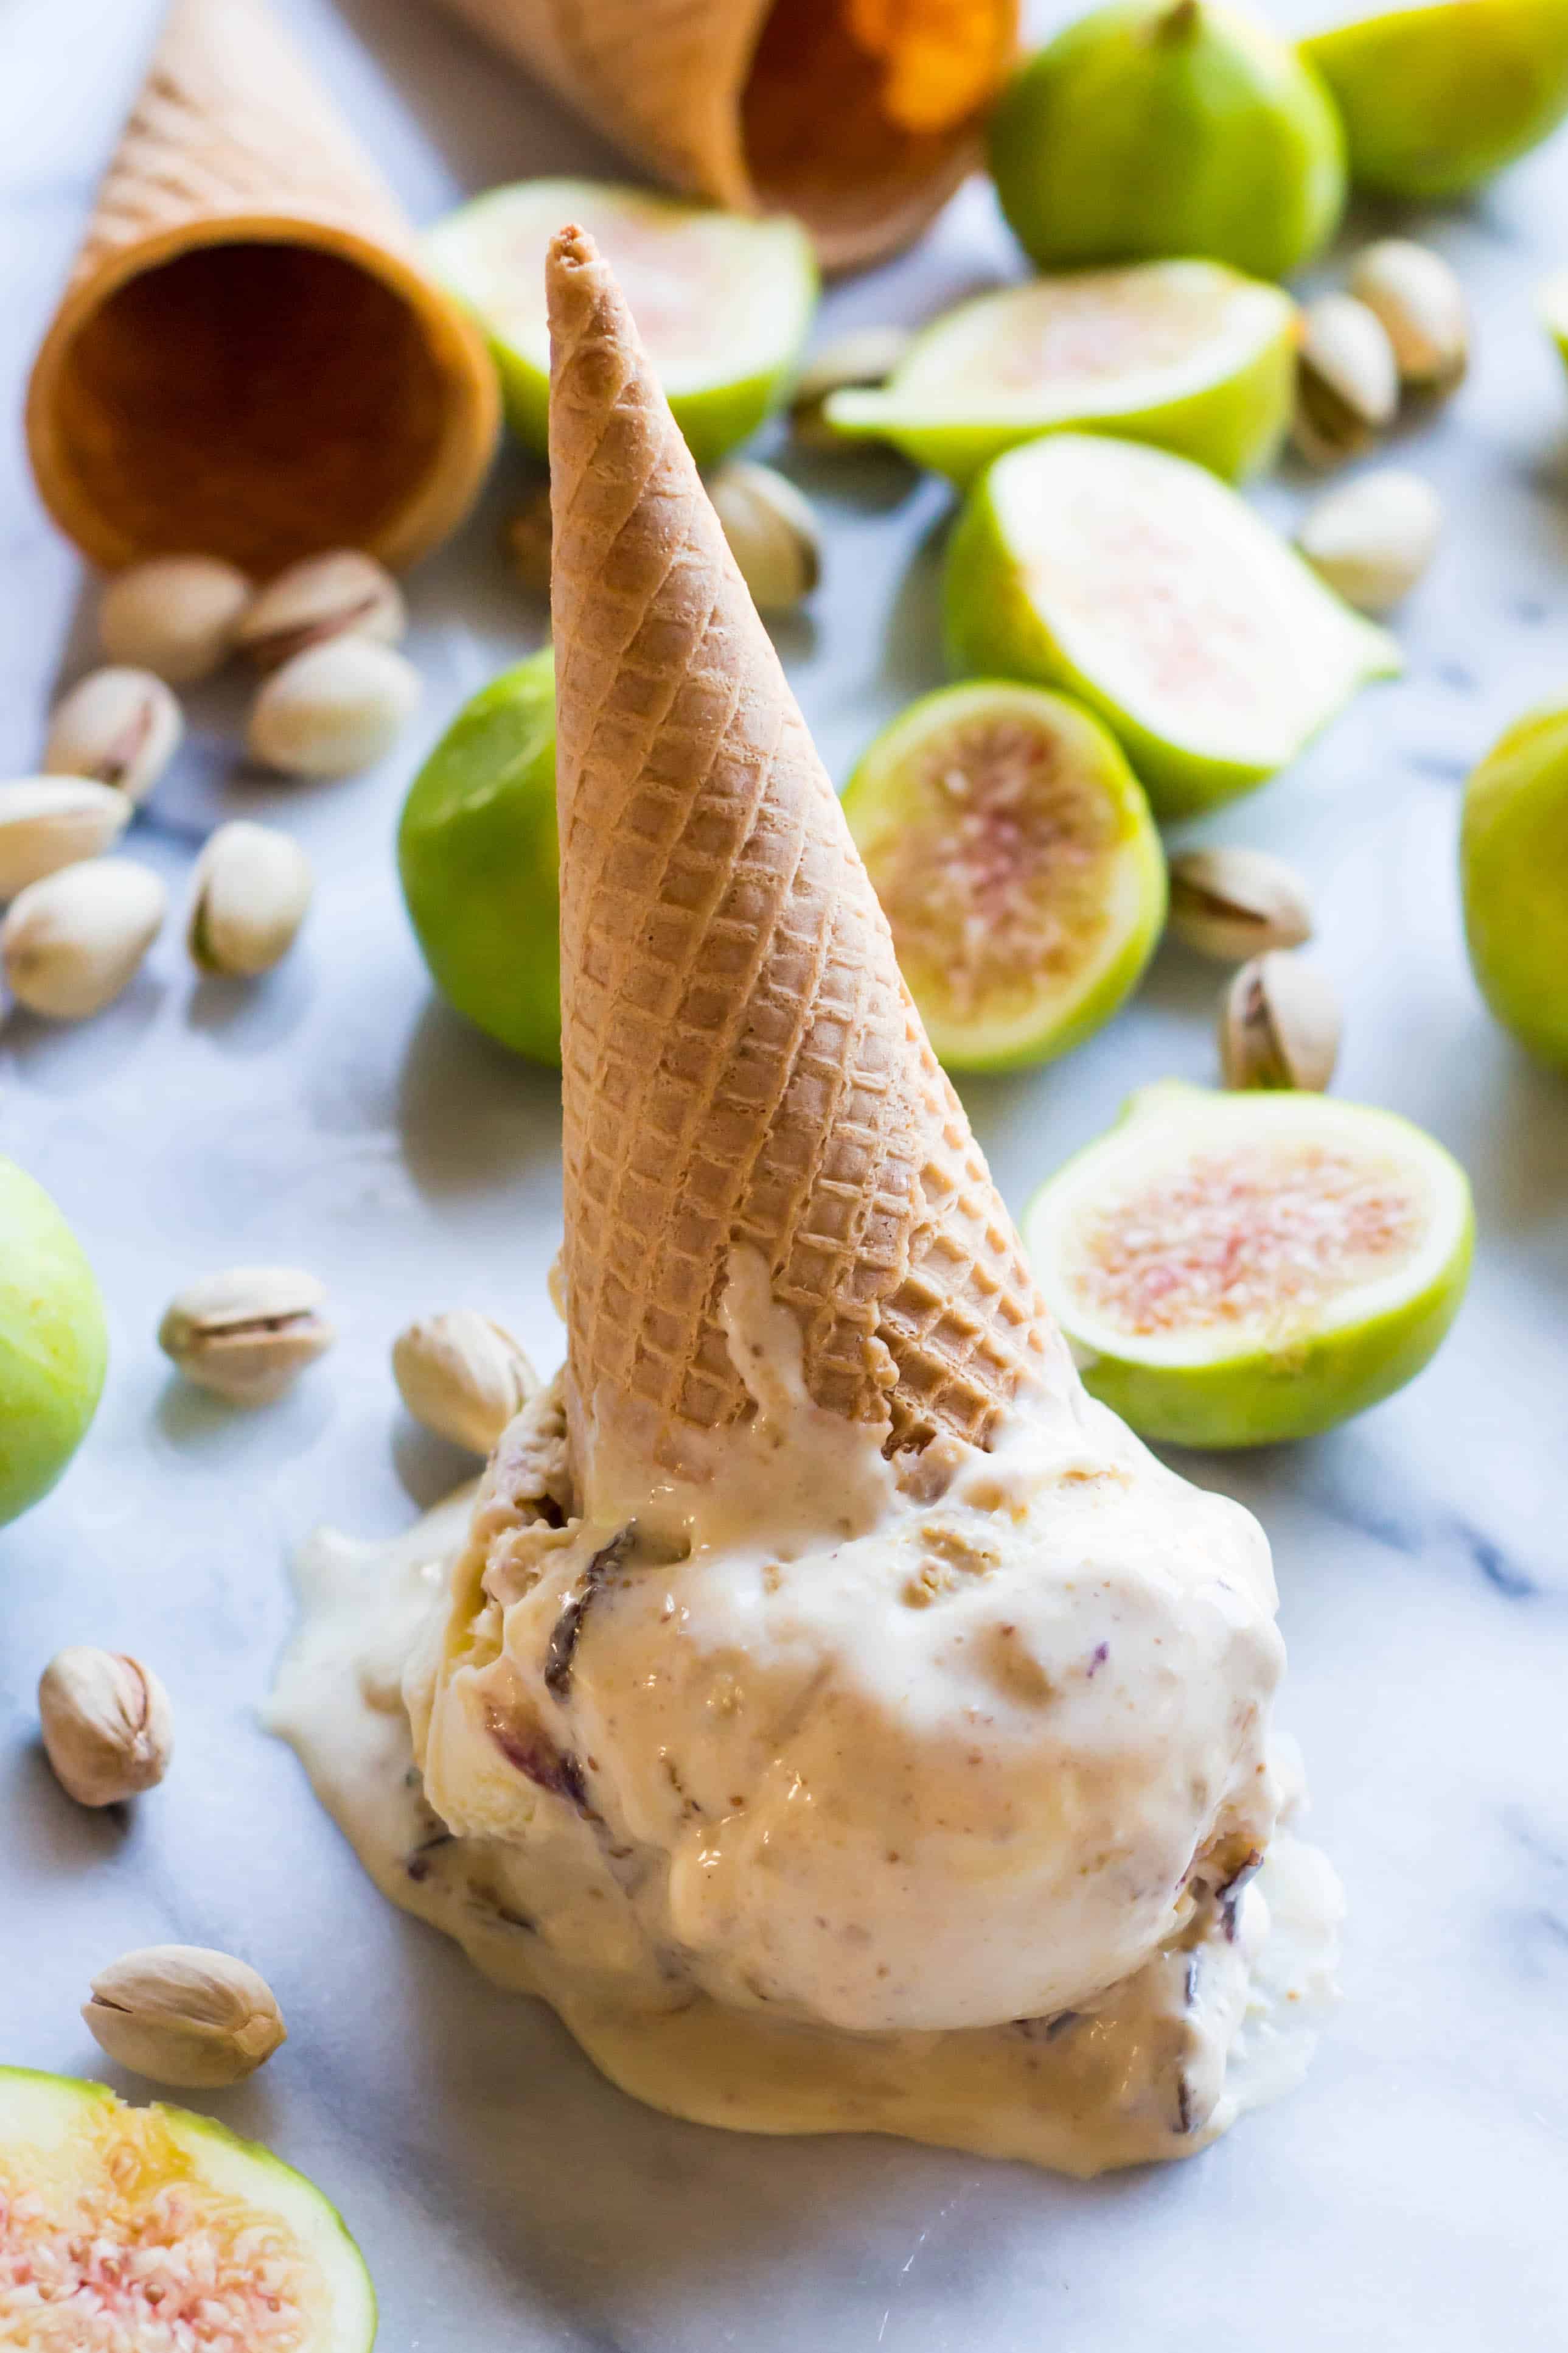 A sugar cone stuck on a large scoop of ricotta gelato of a marble counter surrounded by pistachios and fresh figs.